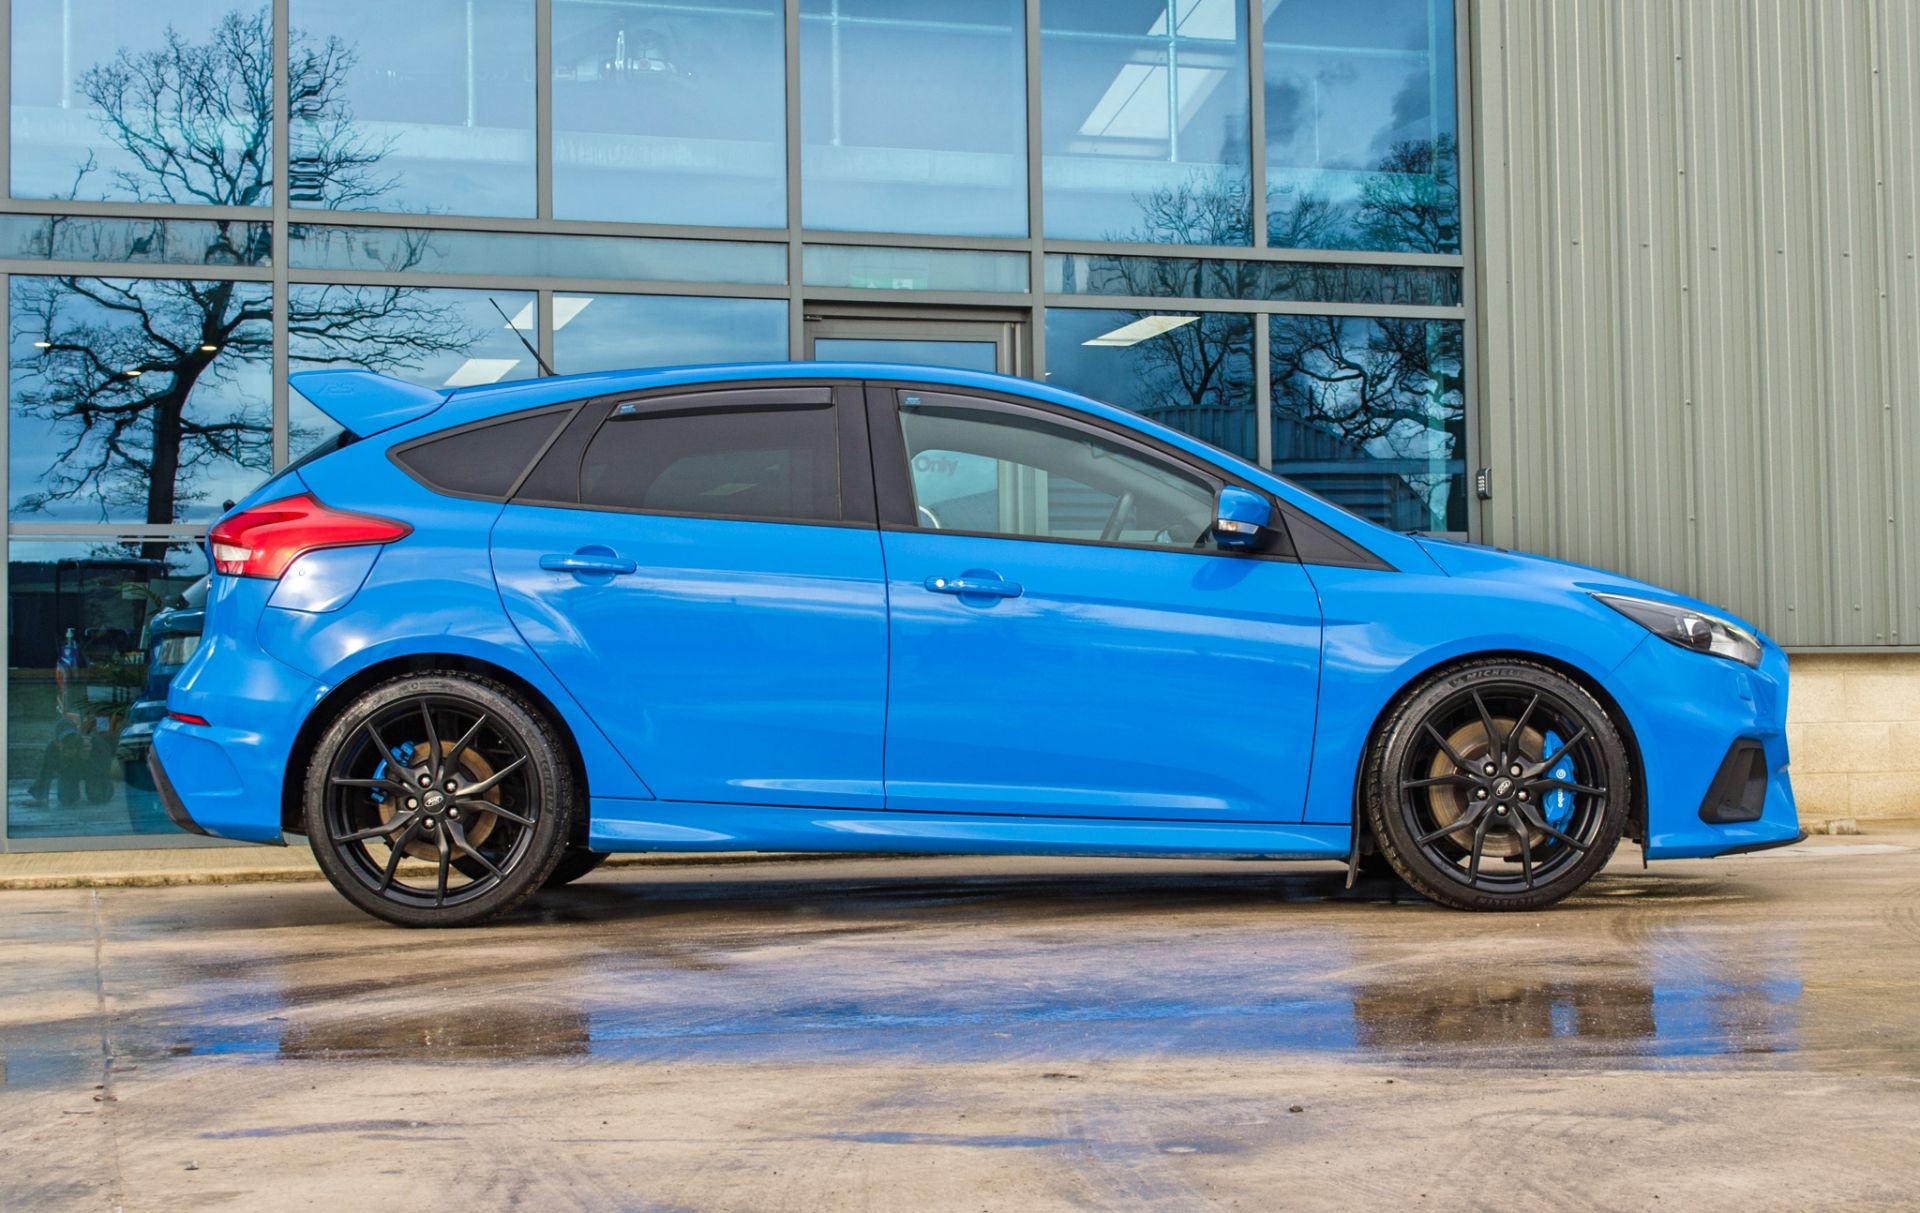 2017 Ford Focus 2.3 RS 5 door hatch back - Image 13 of 56